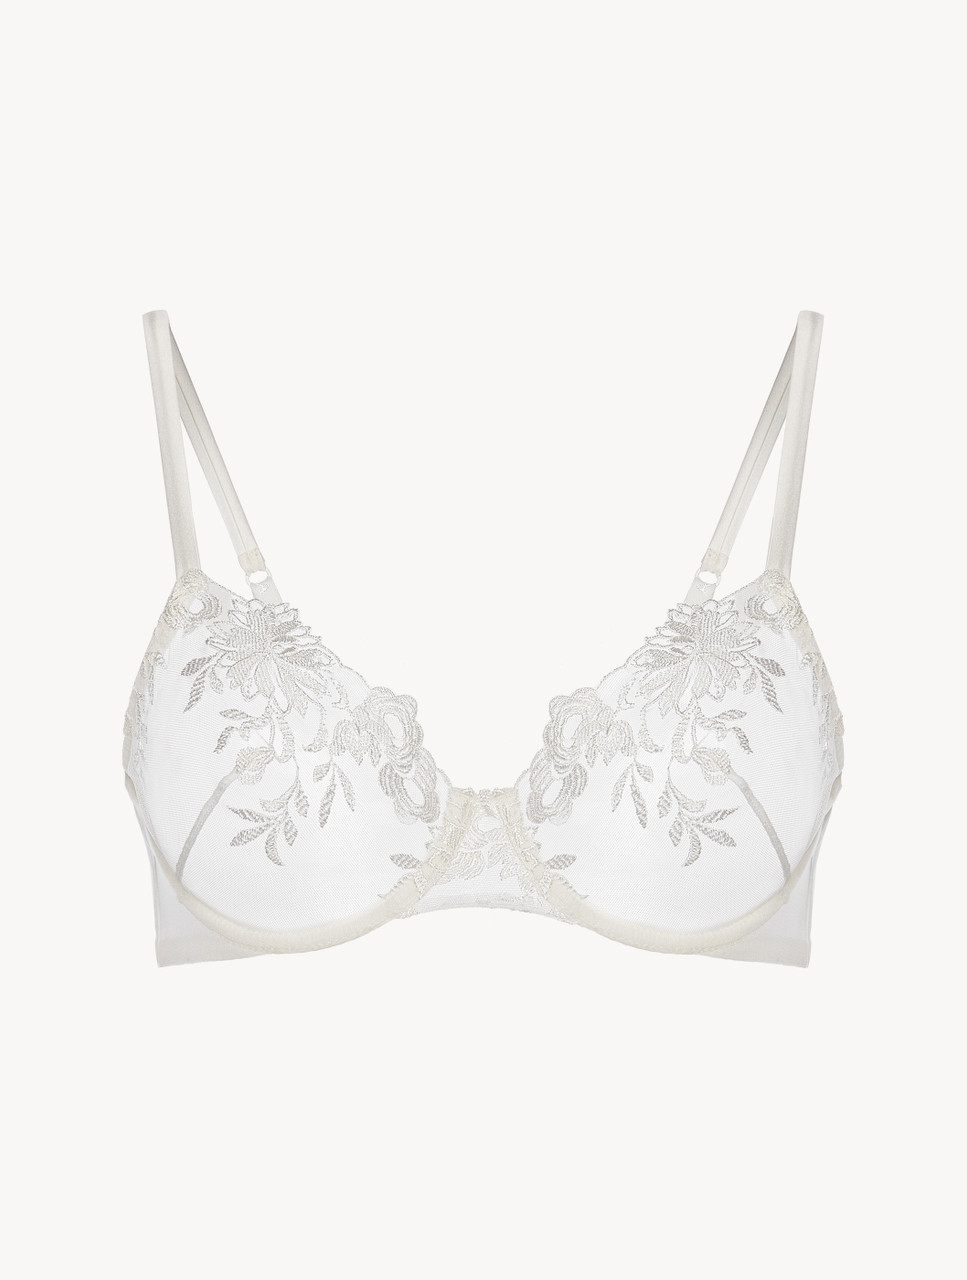 White Lace plunge lingerie set: bra and panties in off-white